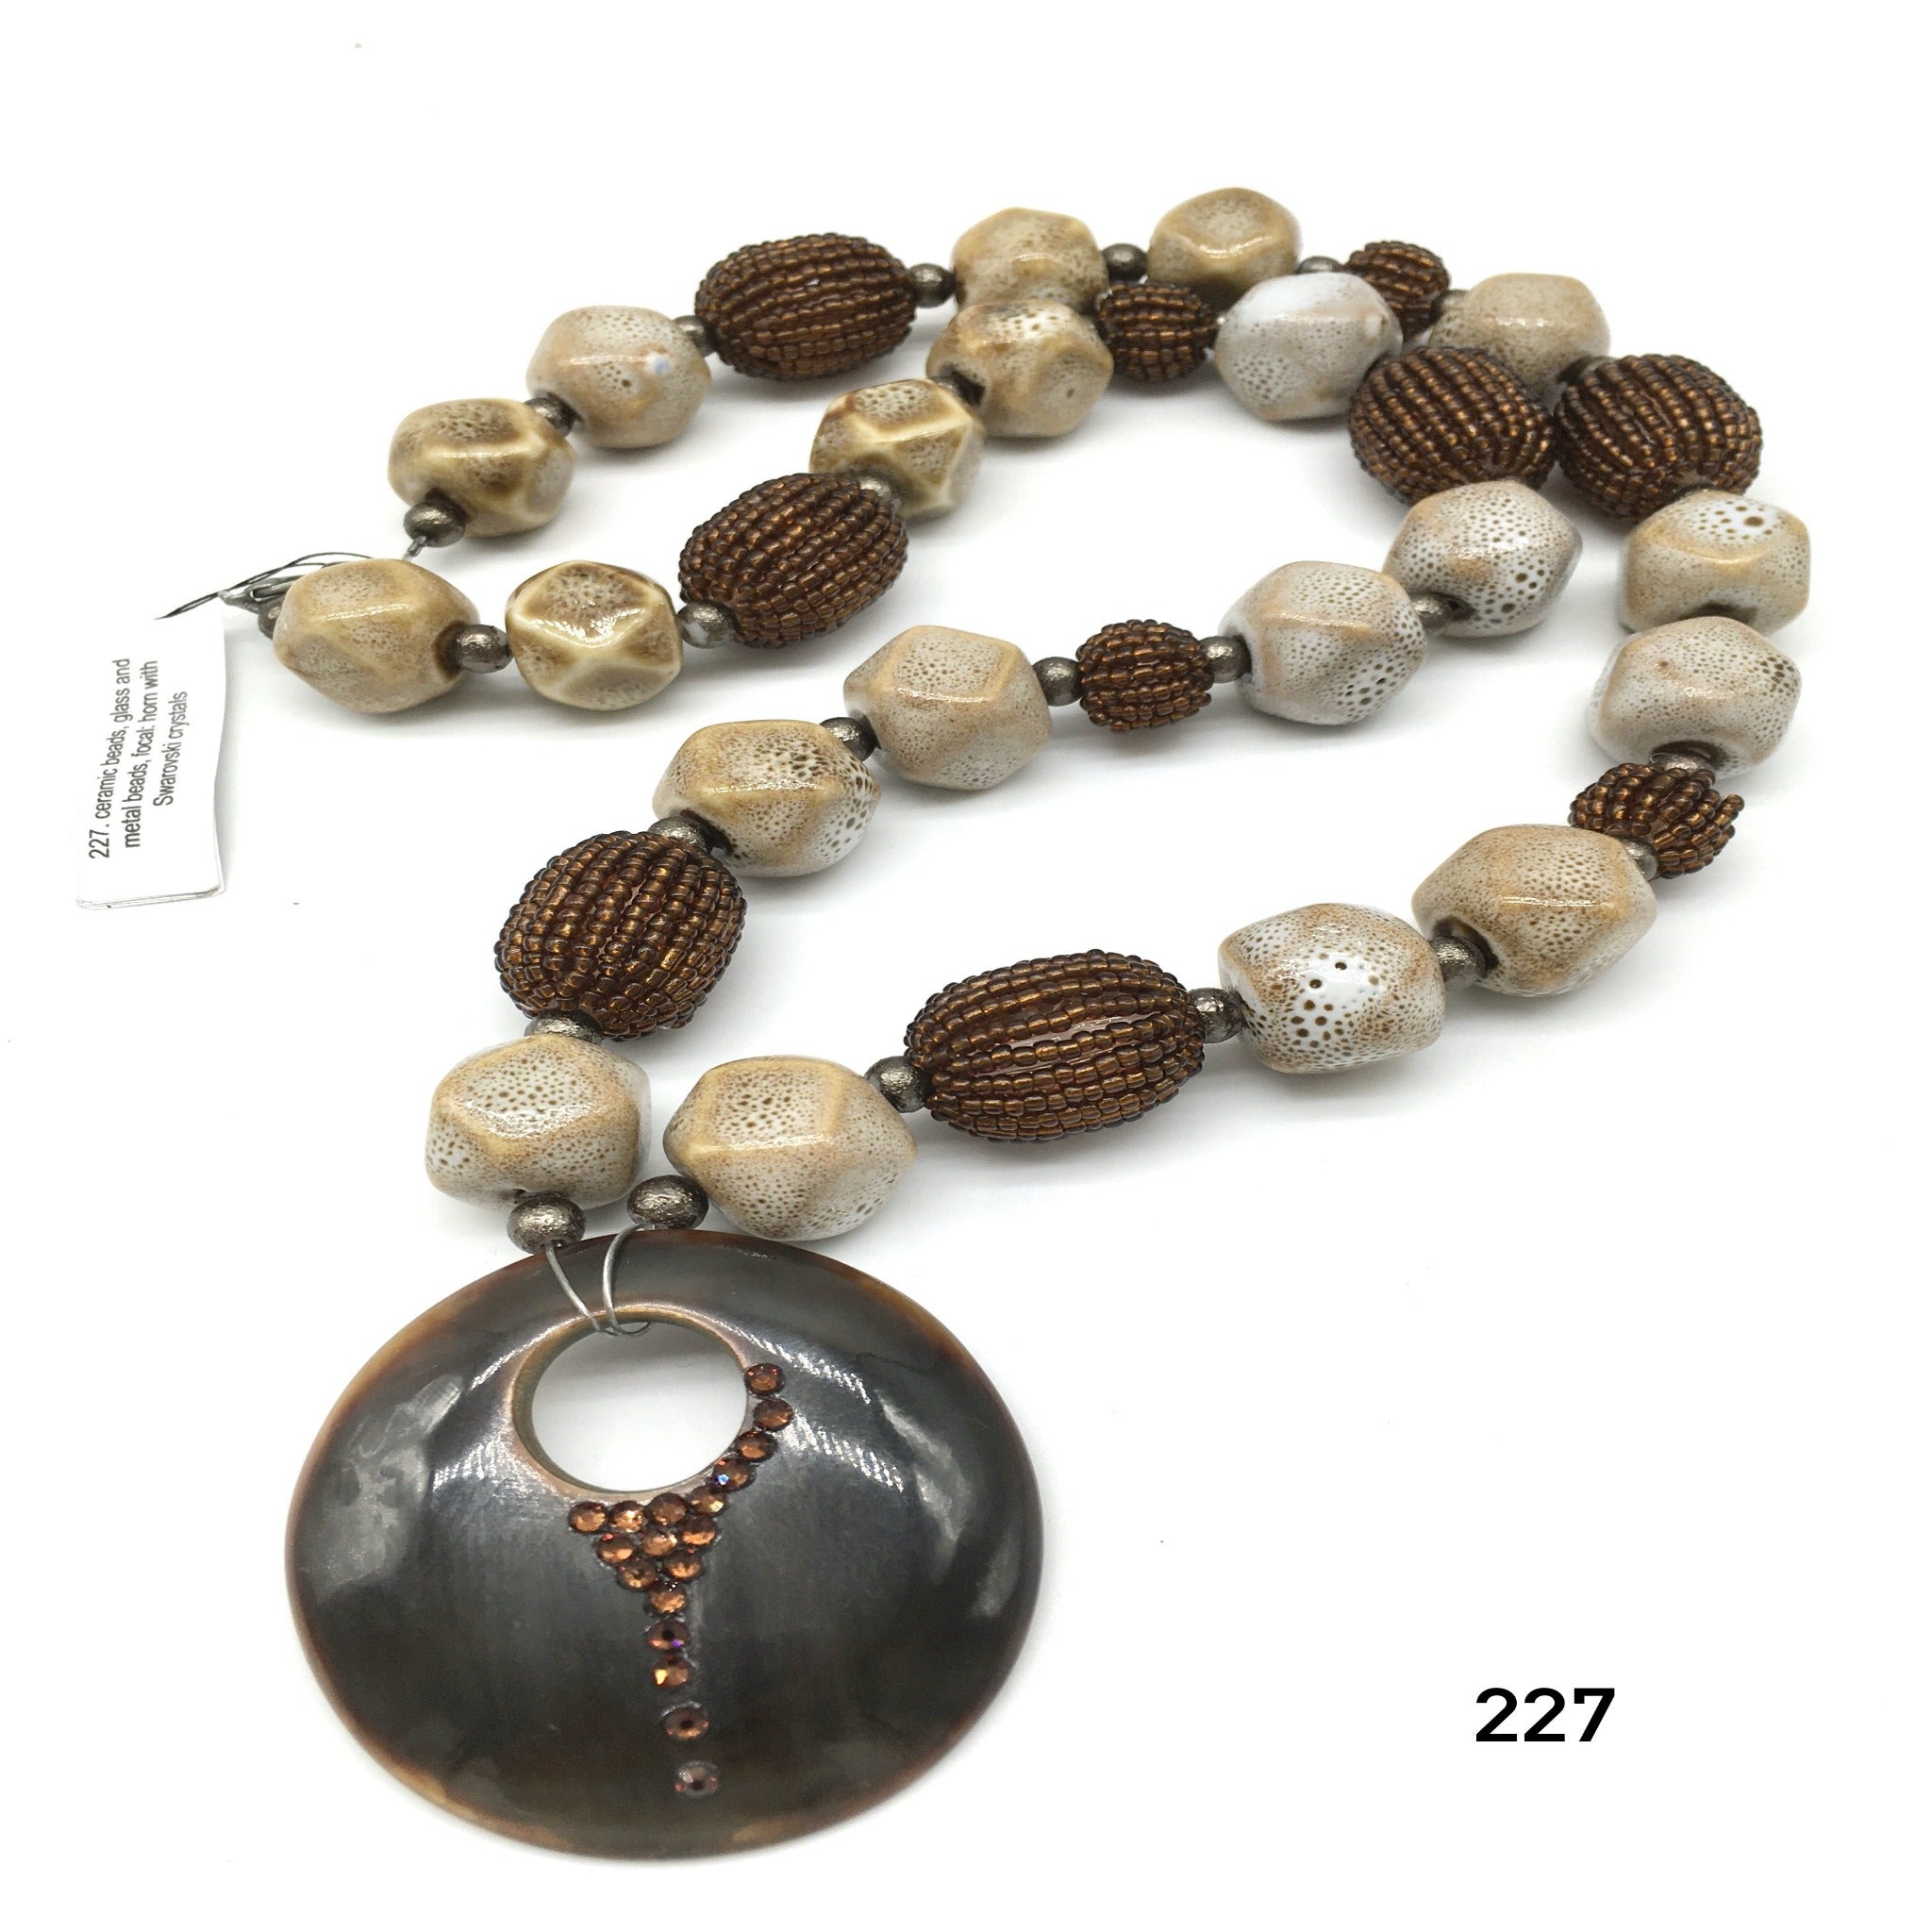 Ceramic beads, glass and metal beads, focal: horn with Swarovski crystals necklace created by Dorothea Drew Design central NJ